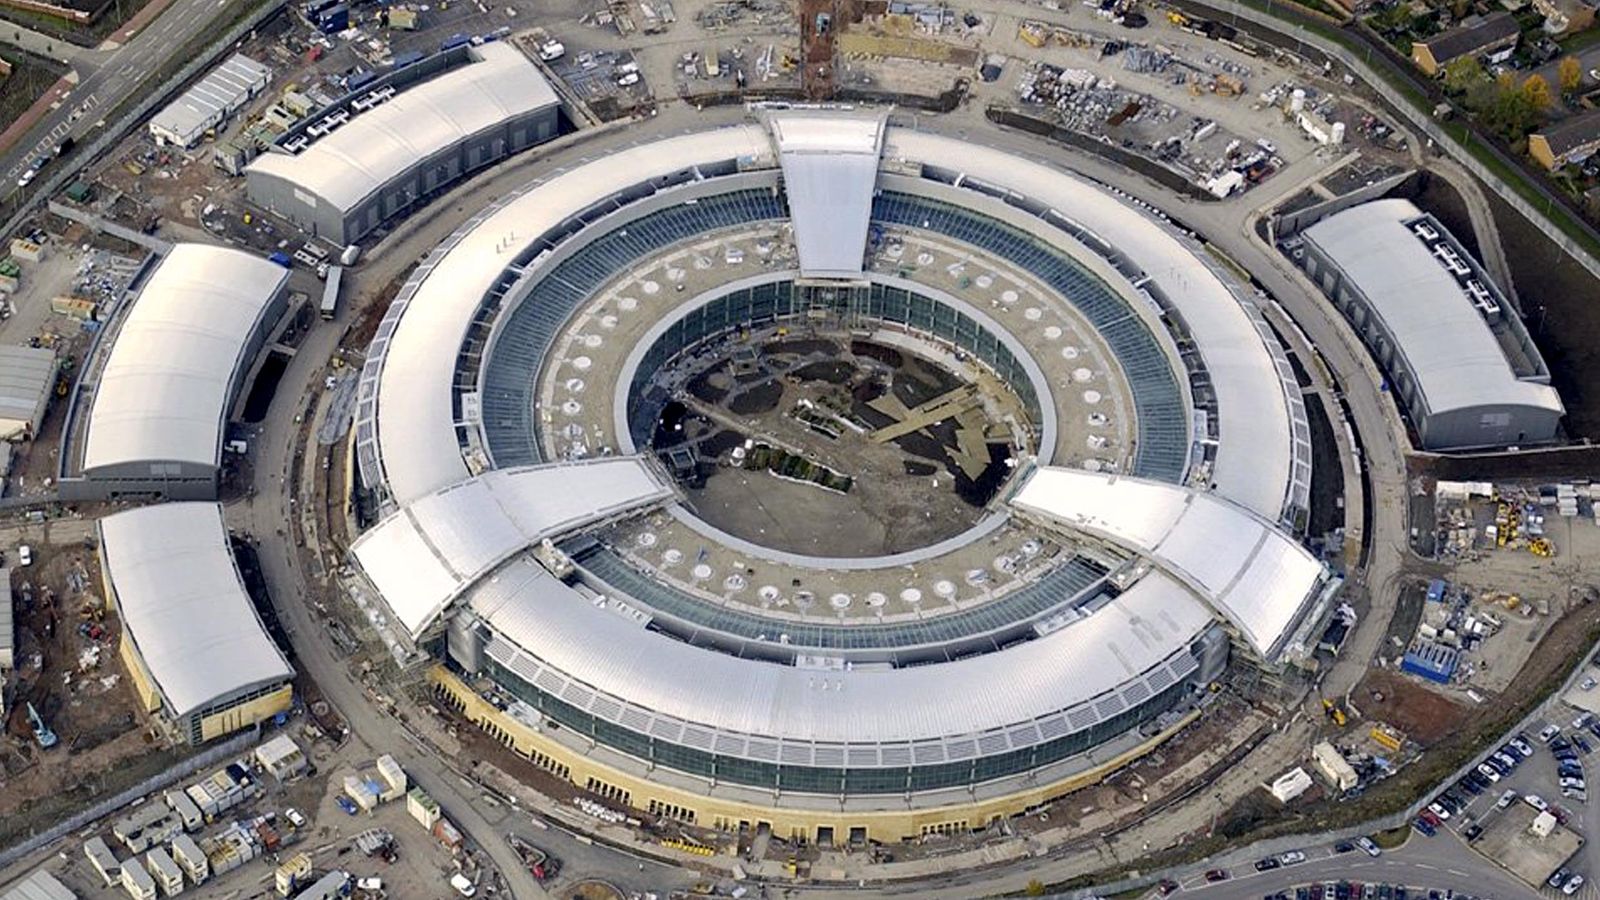 'American spy working at GCHQ' was stabbed in suspected terror incident